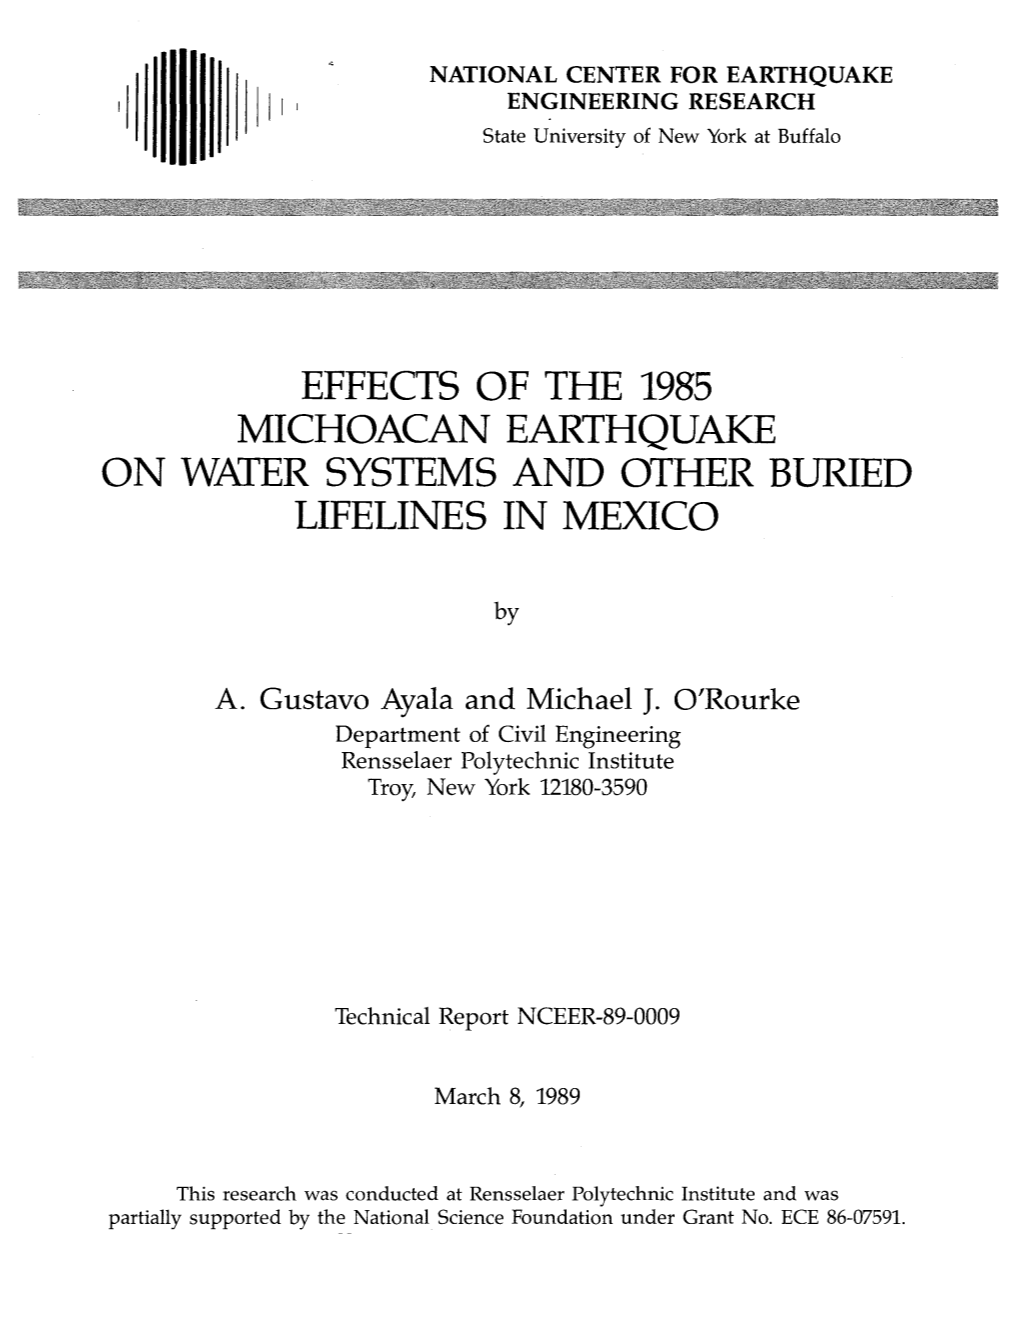 Effects of the 1985 Michoacan Earthquake on Water Systems and Other Buried Lifelines in Mexico